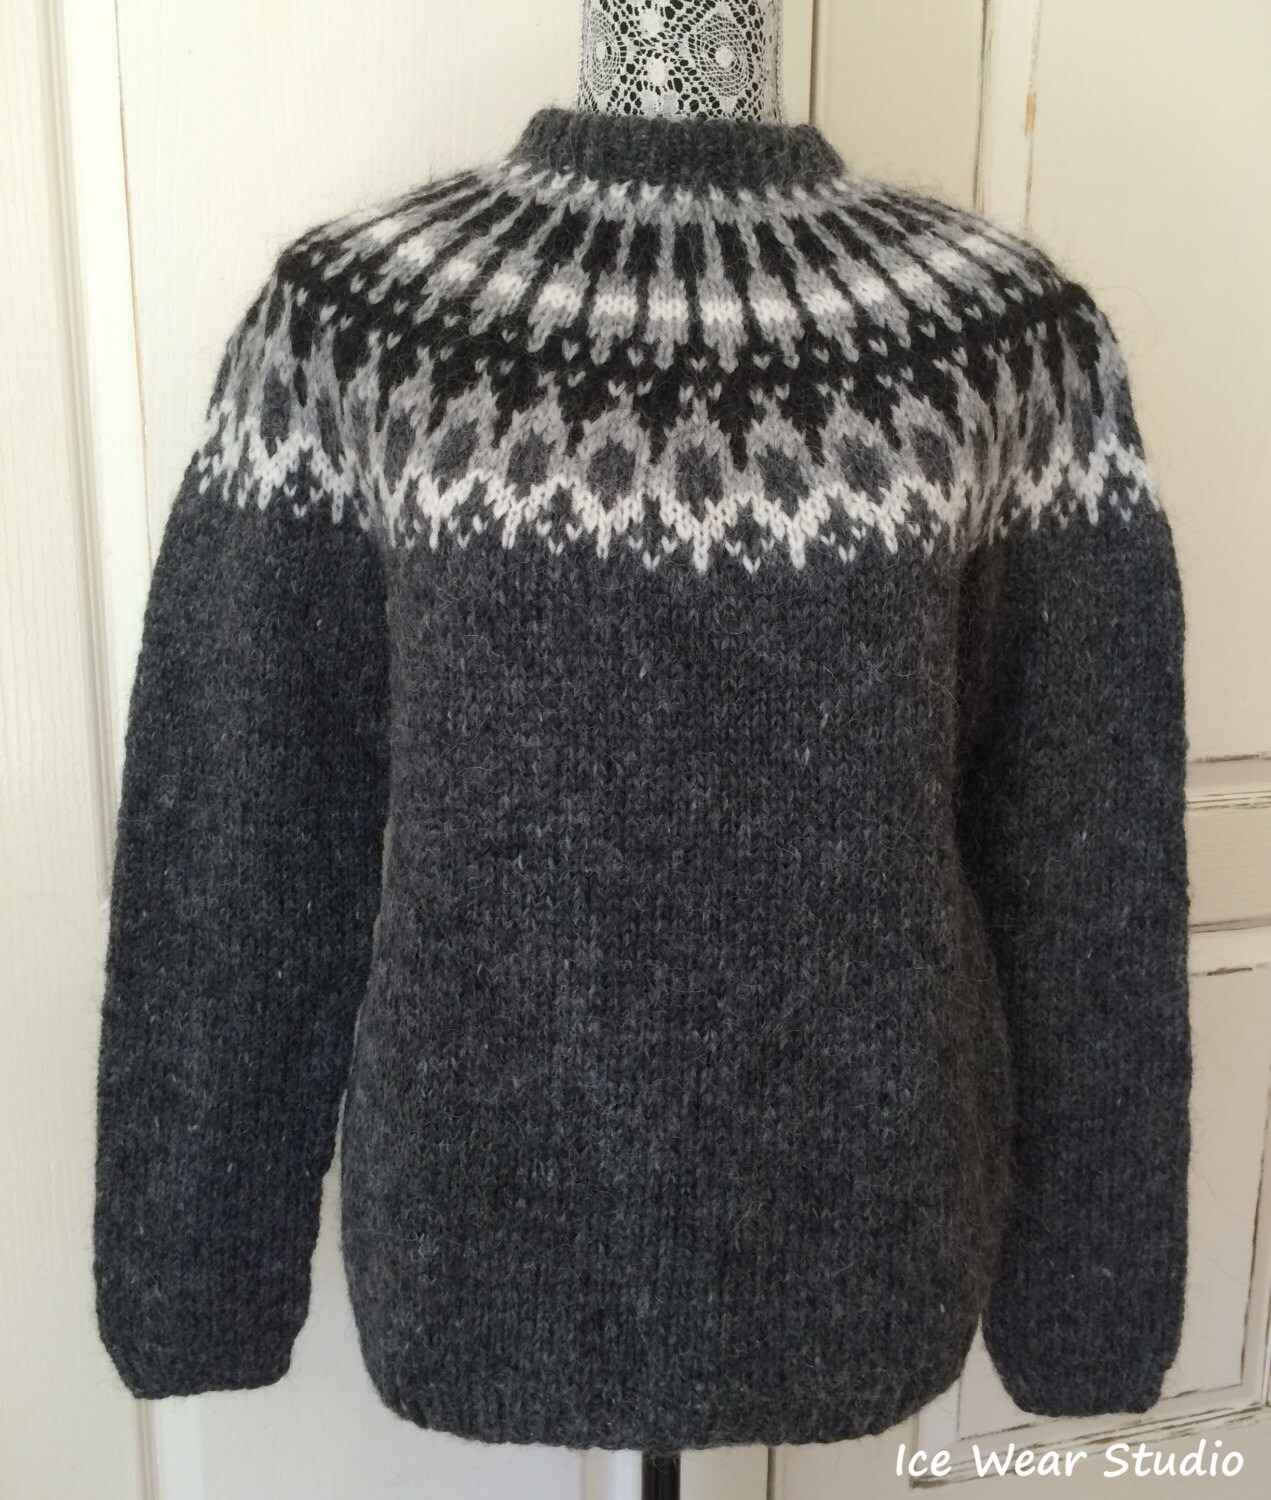 Icelandic Wool Sweater Hand Knitted With Icelandic Wool